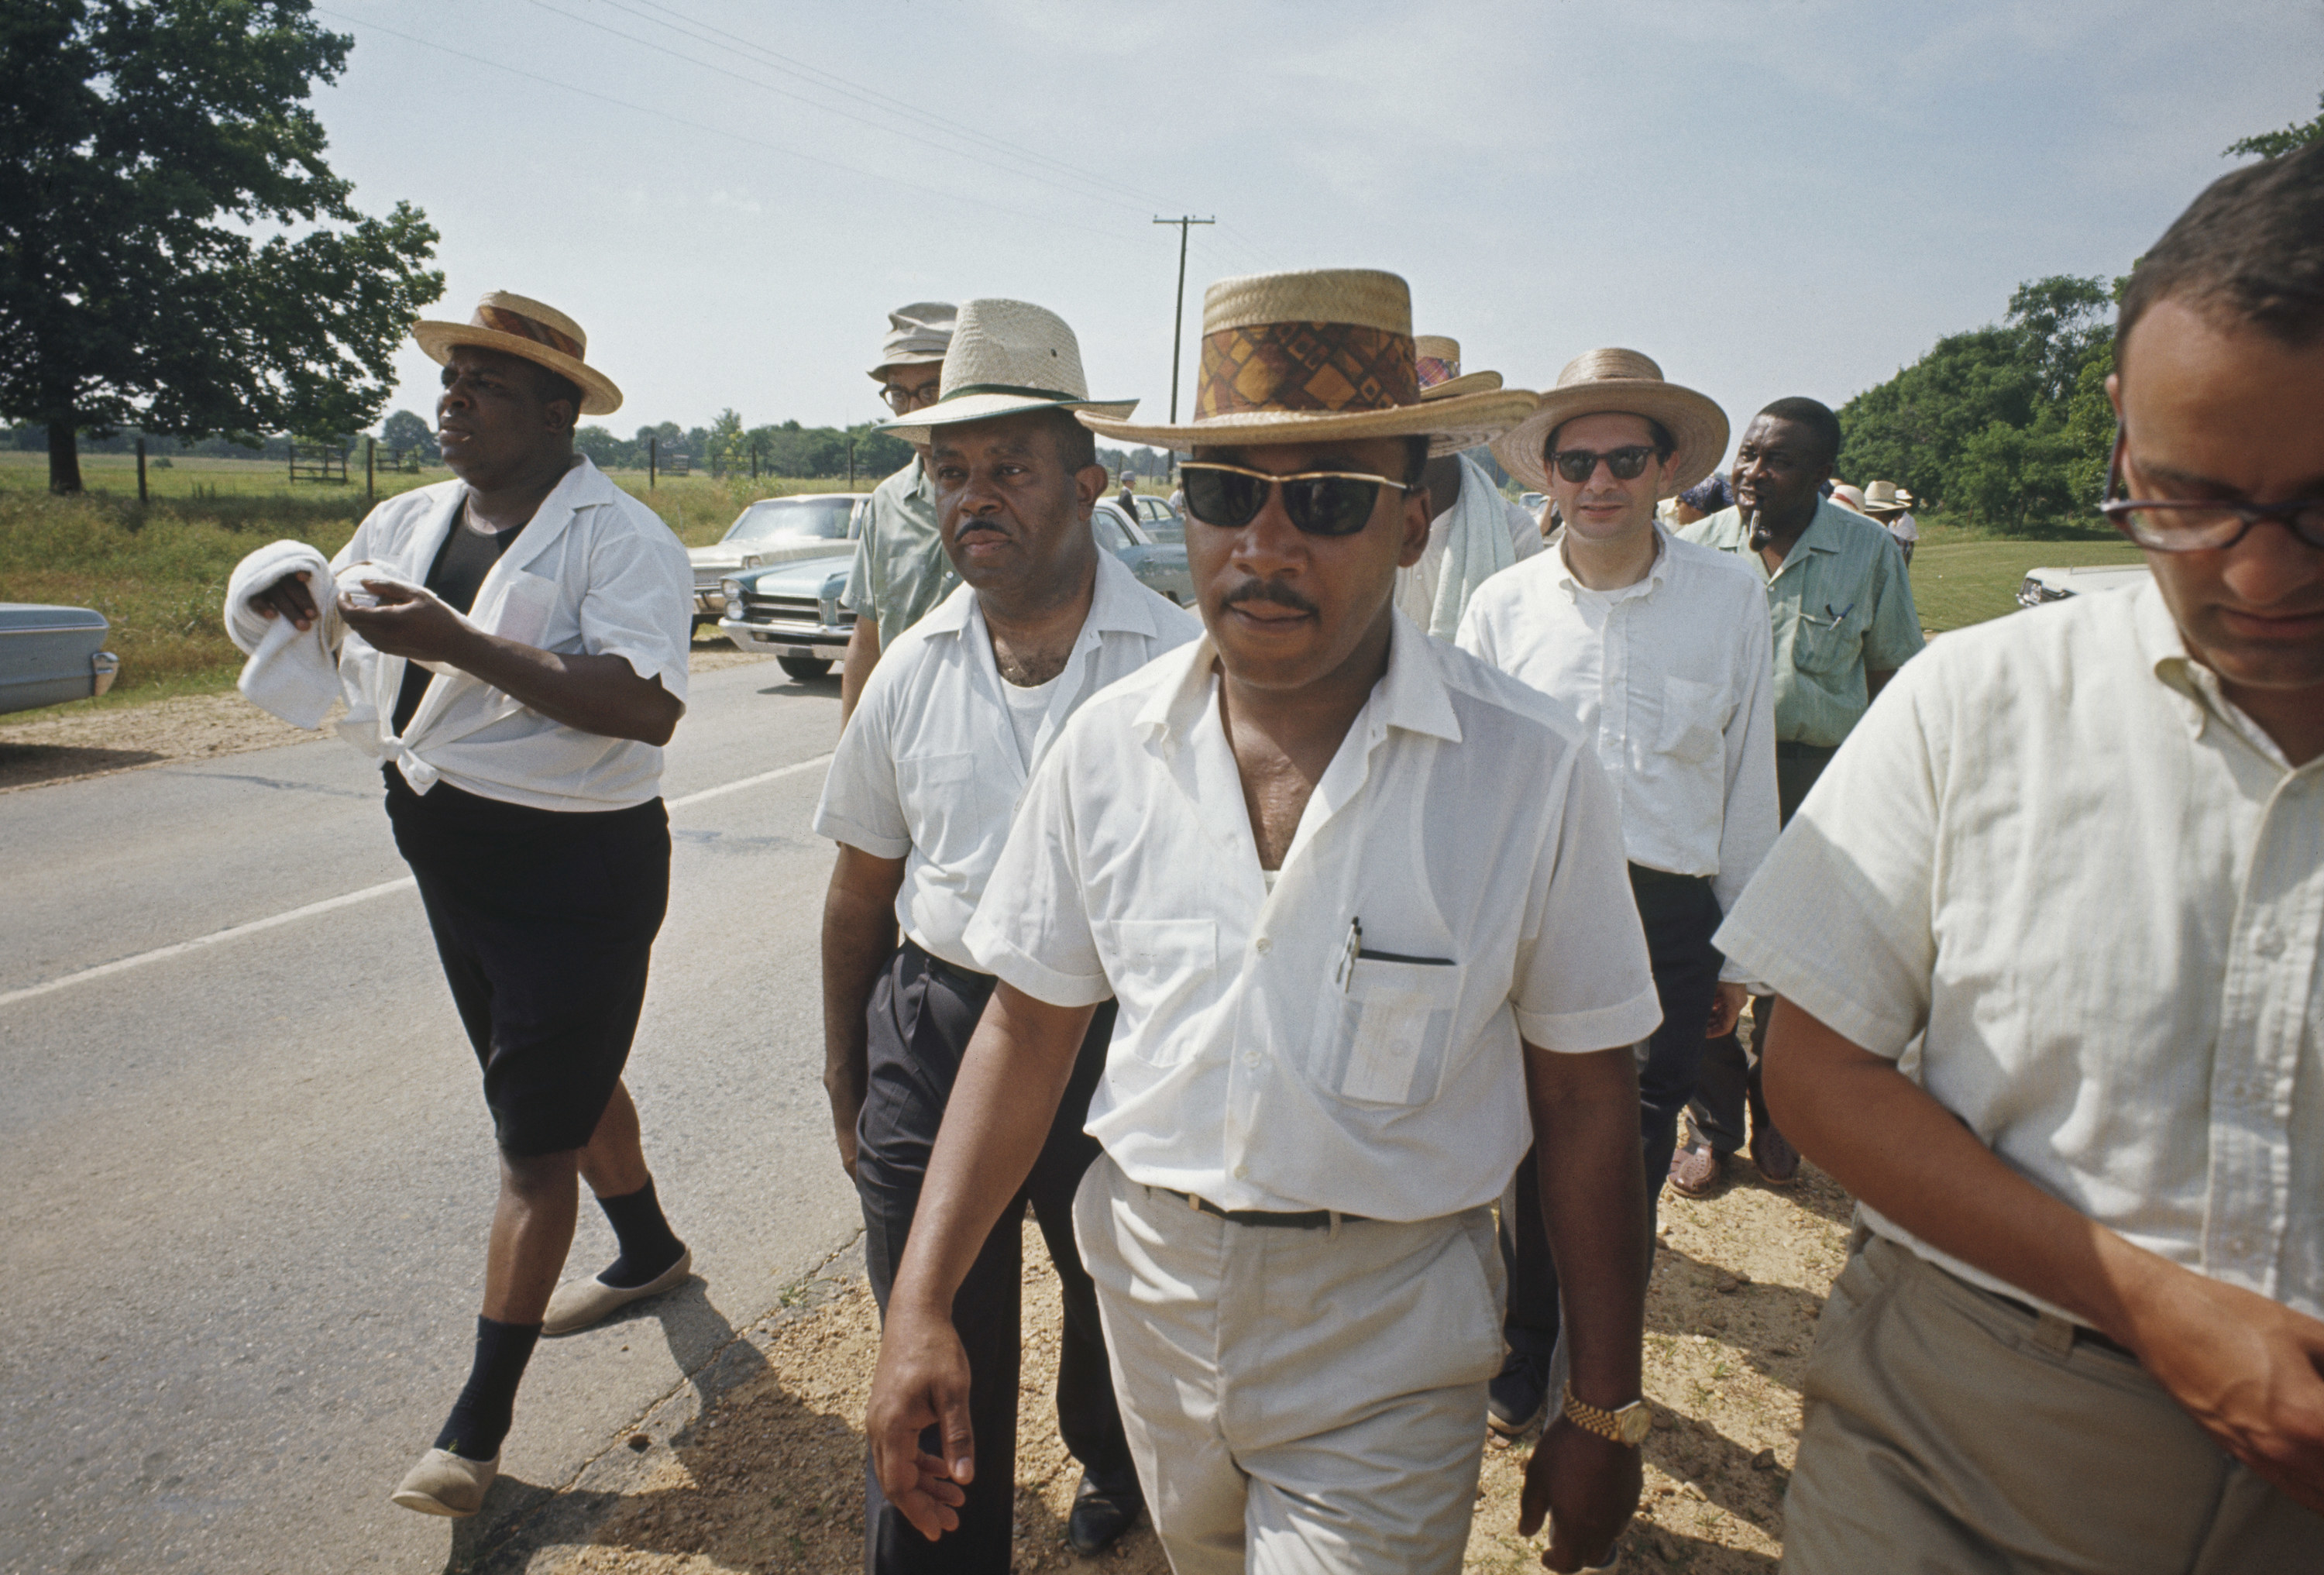 Dr. King marching